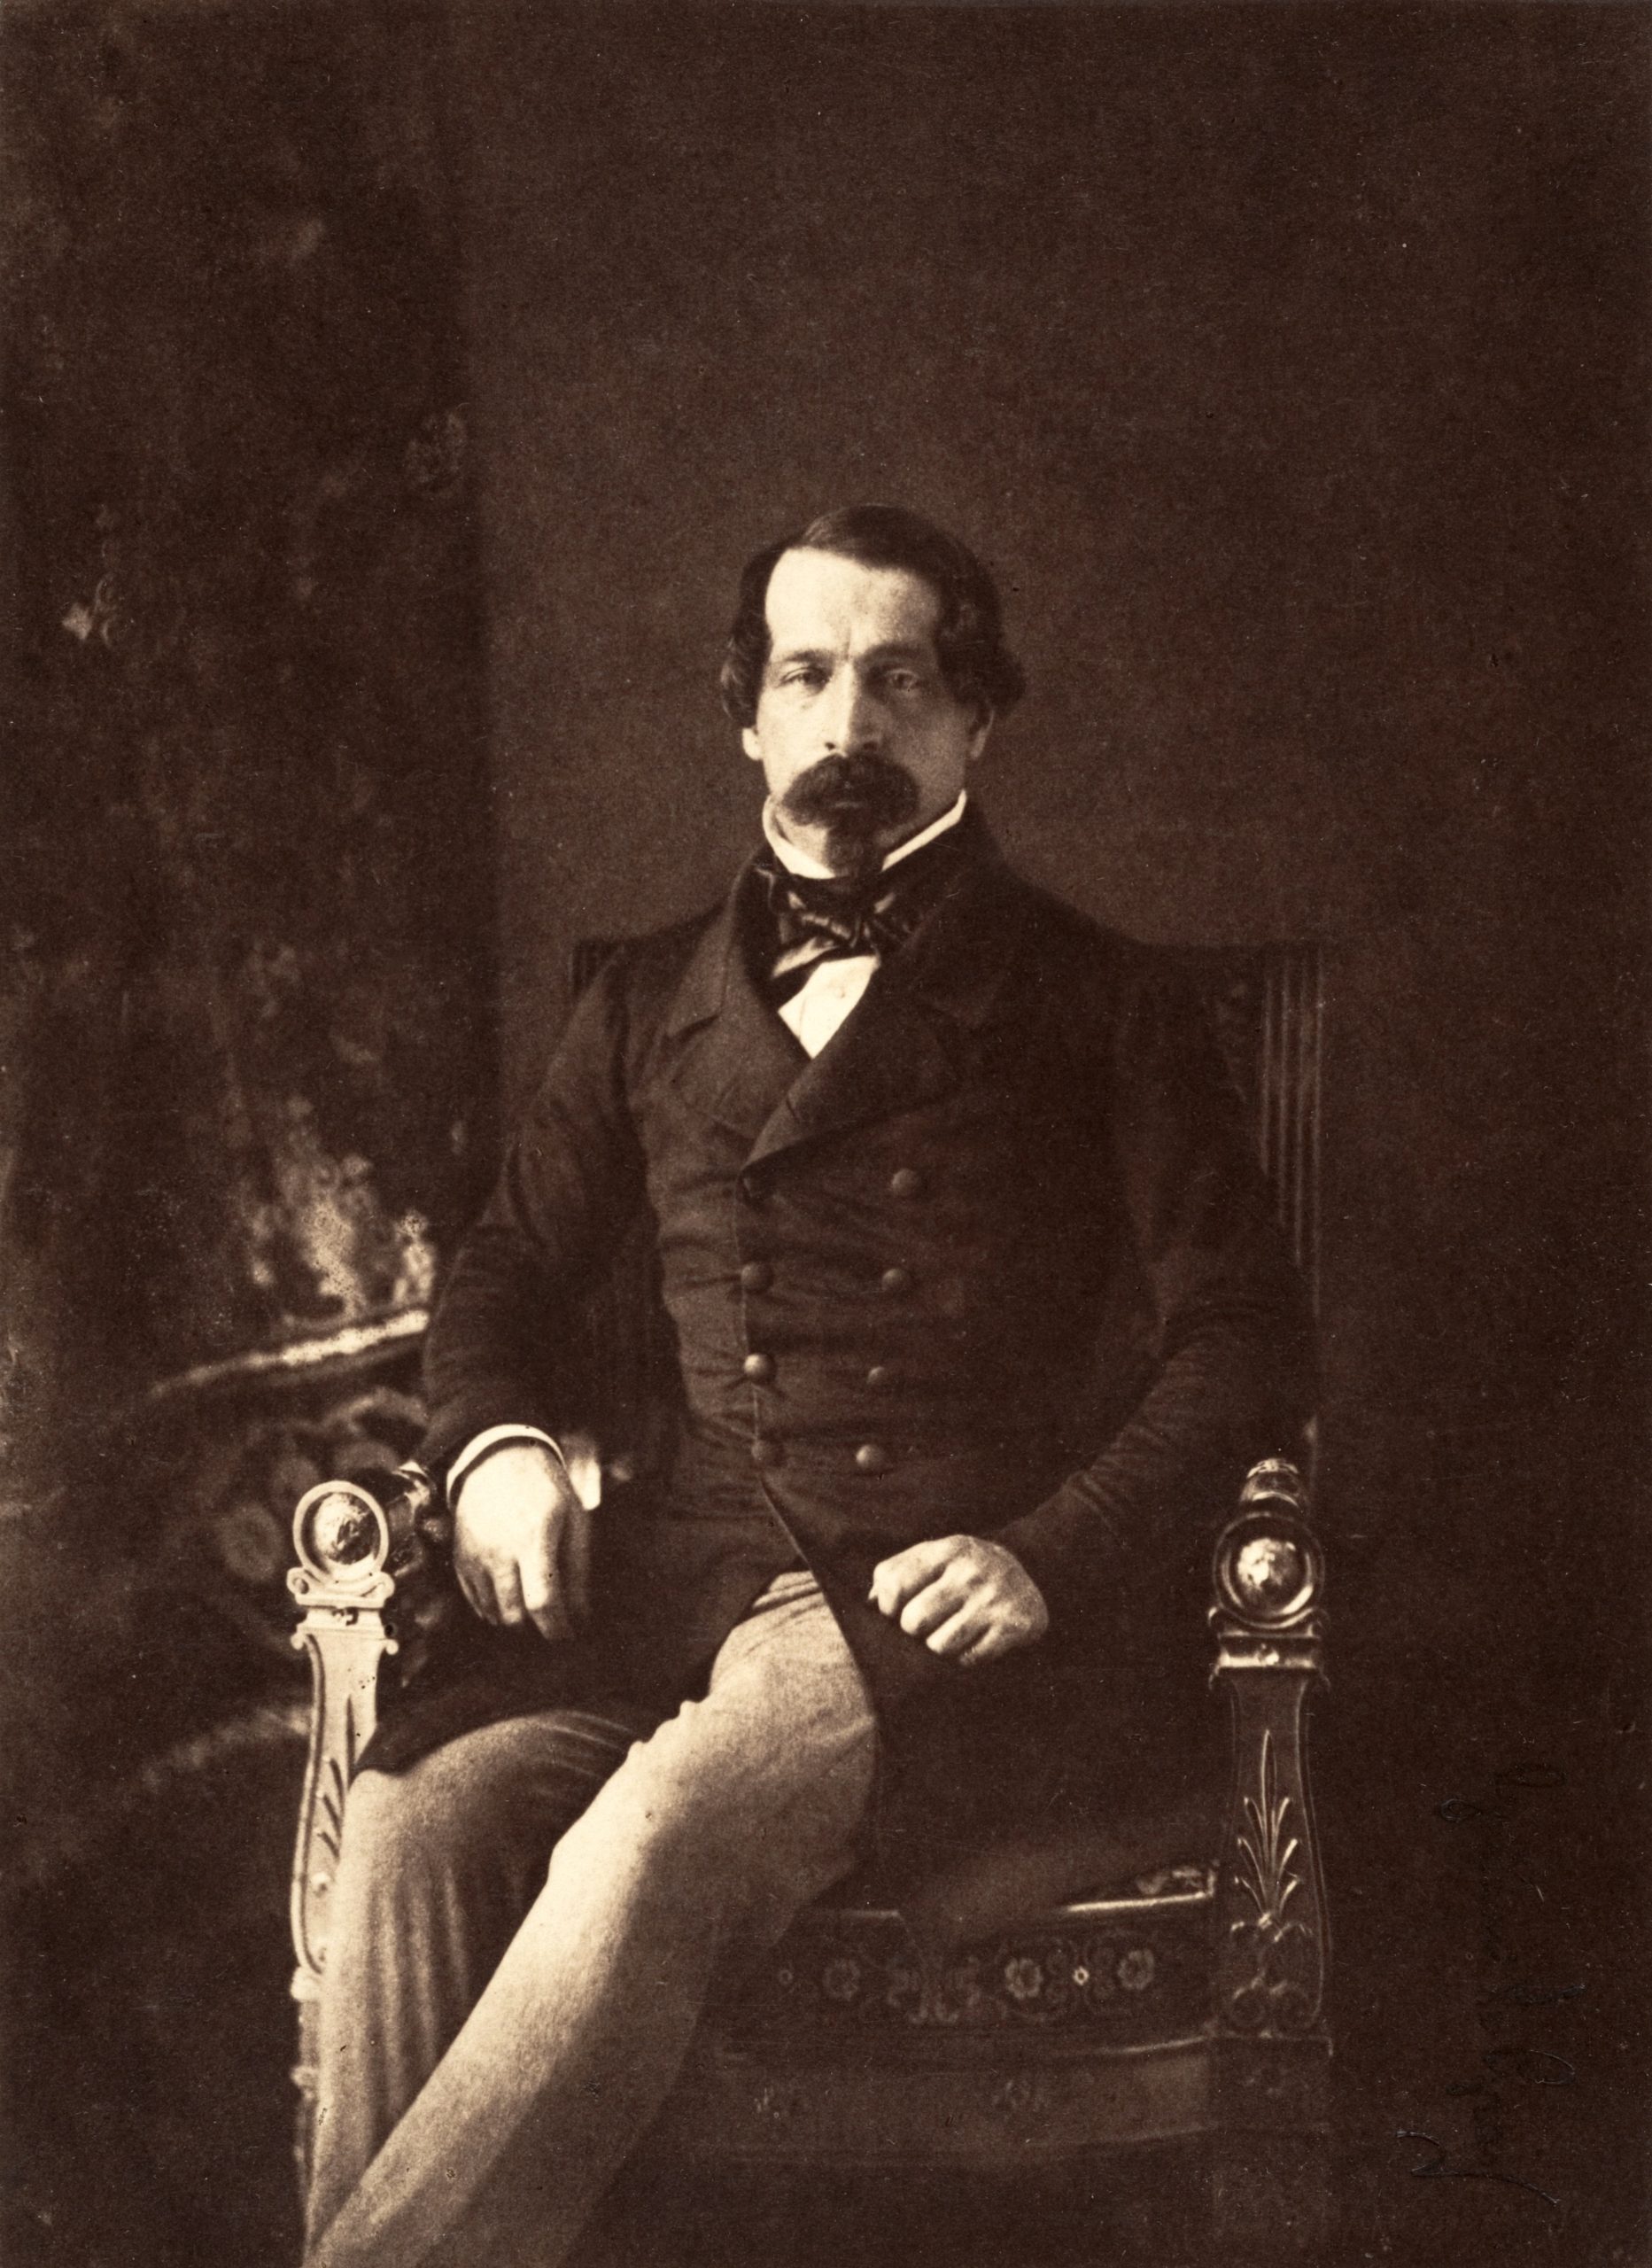 Louis Napoleon III photograph 1852 by Gustave Le Gray, Metropolitan Museum of Art, NYC